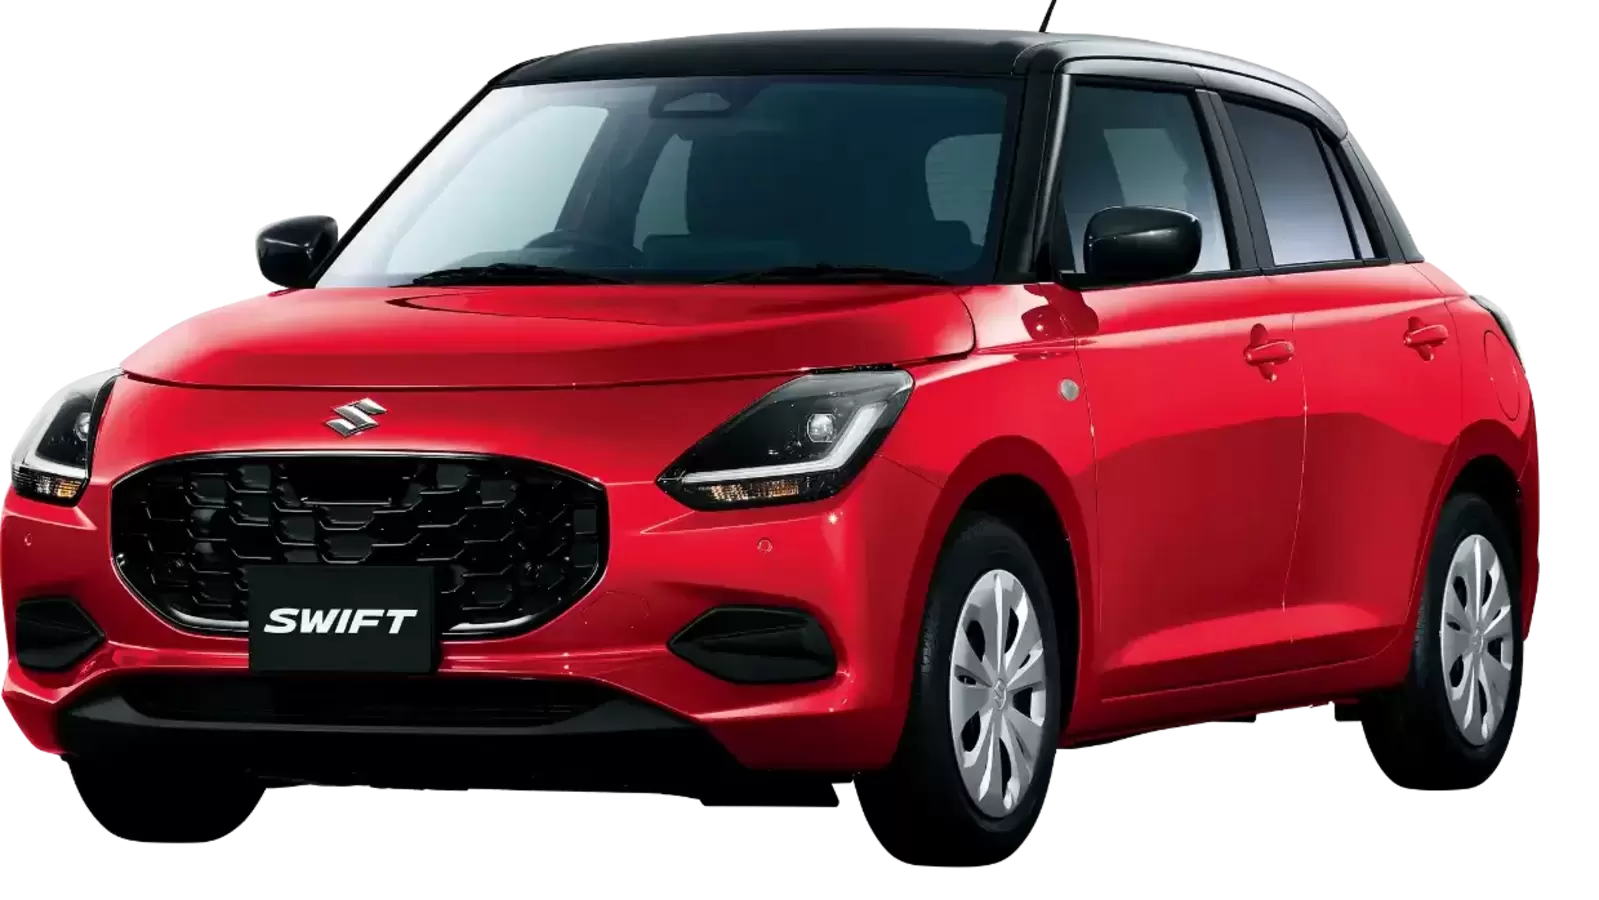 Why the Suzuki Swift is Perfect for New Drivers - The Details